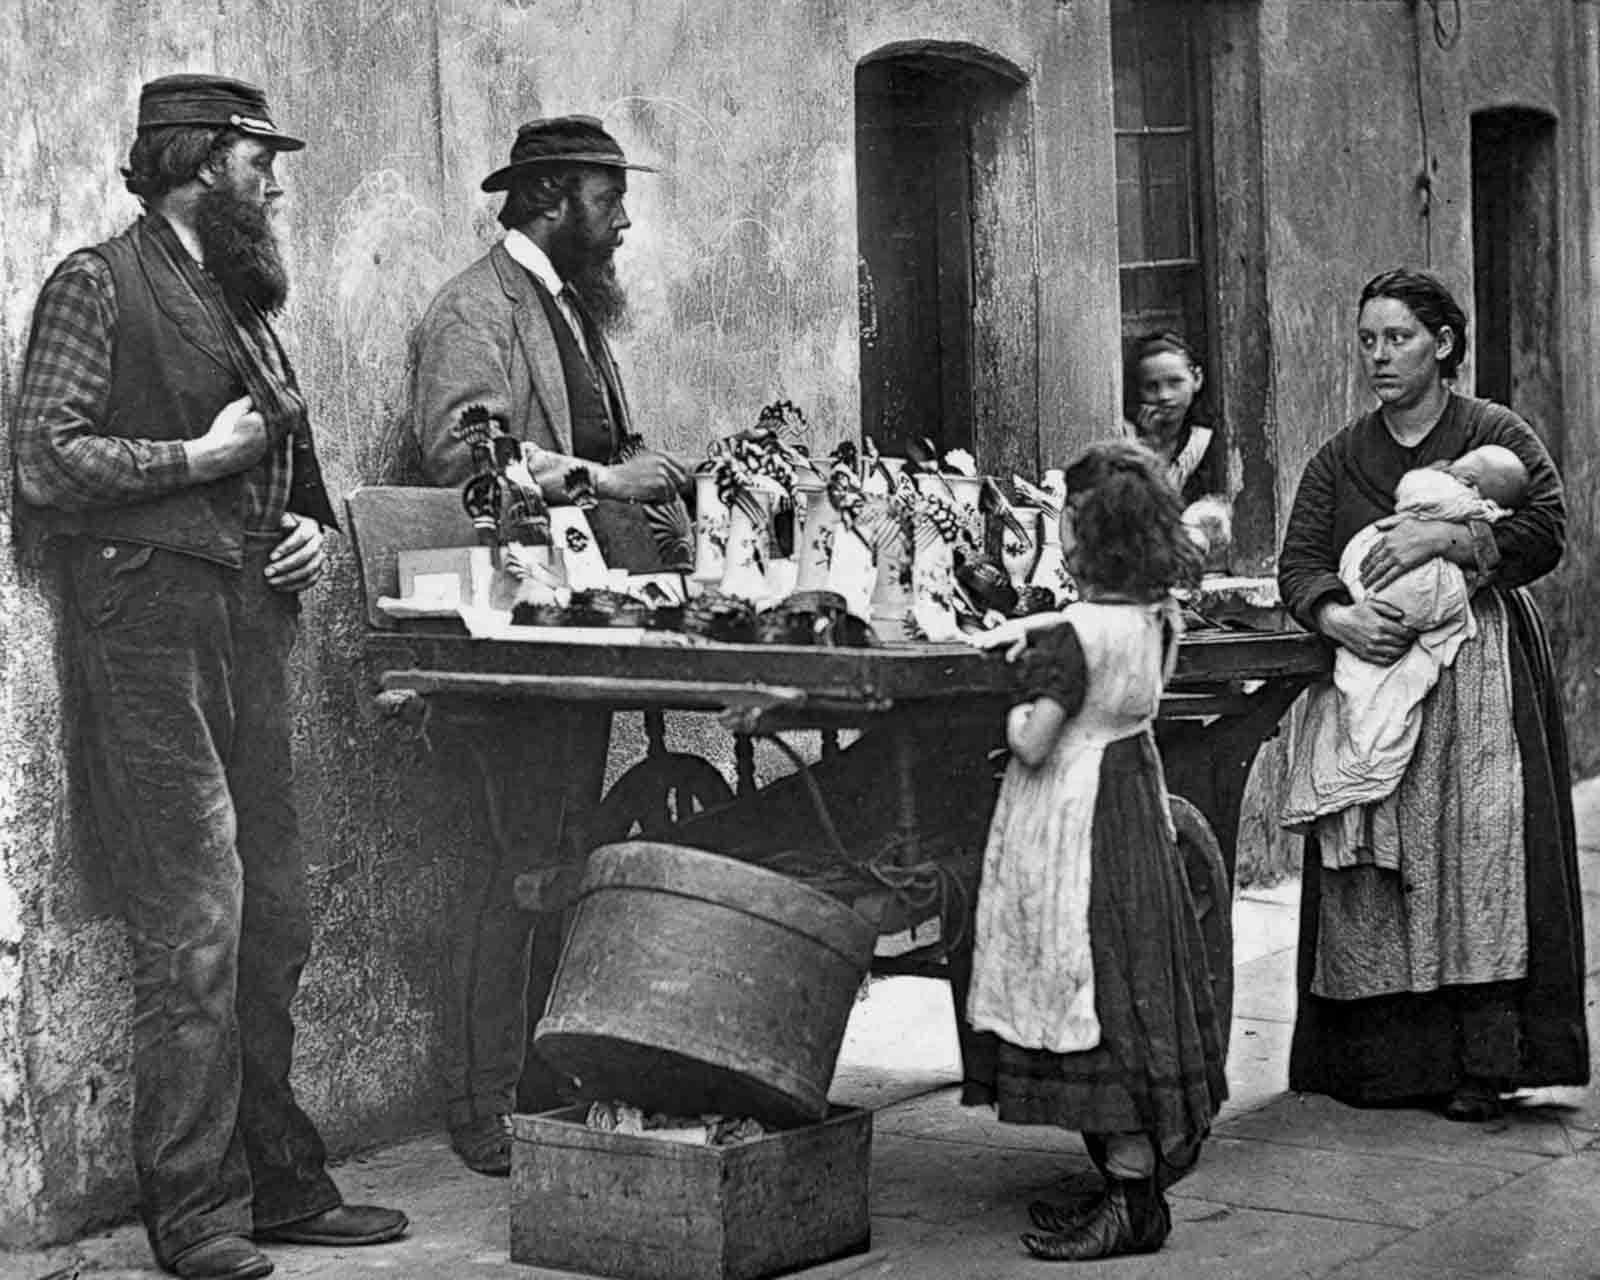 A fancy ware dealer sells ornaments from his barrow, 1877.